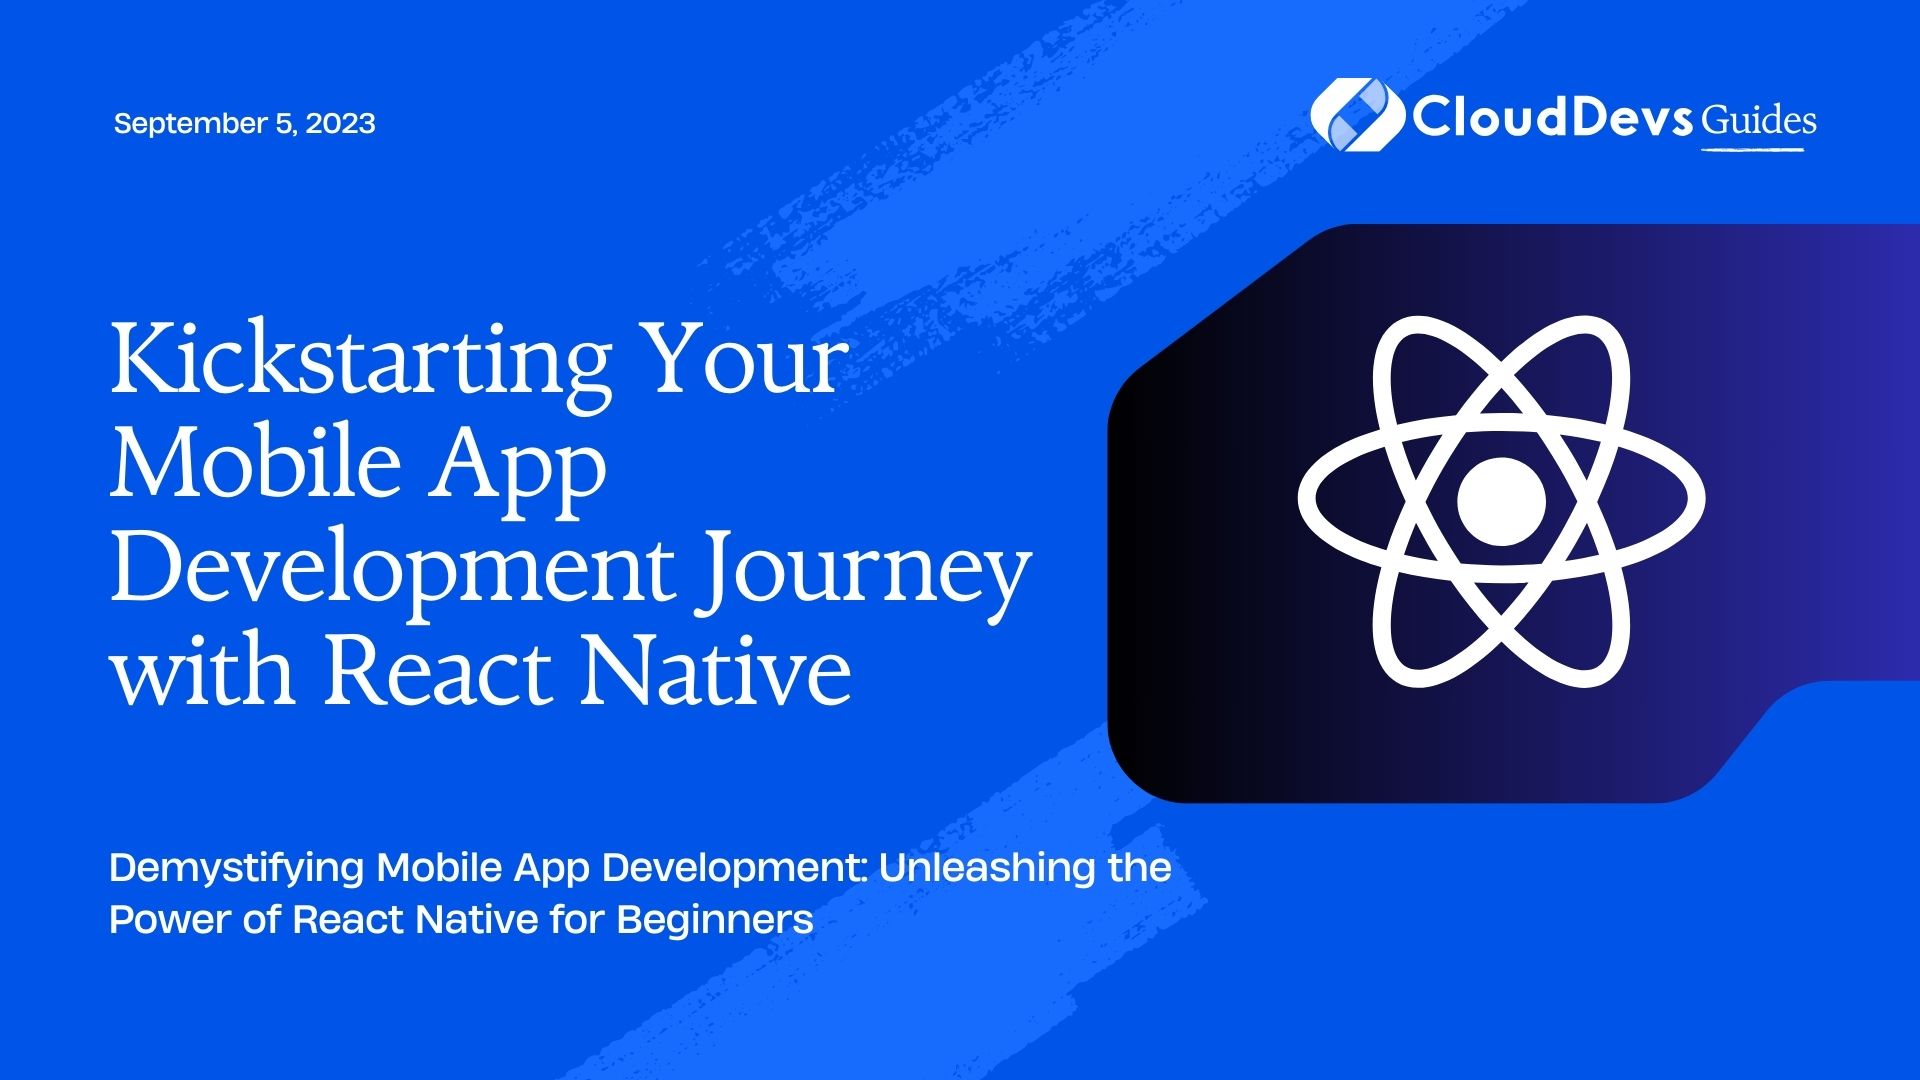 Kickstarting Your Mobile App Development Journey with React Native